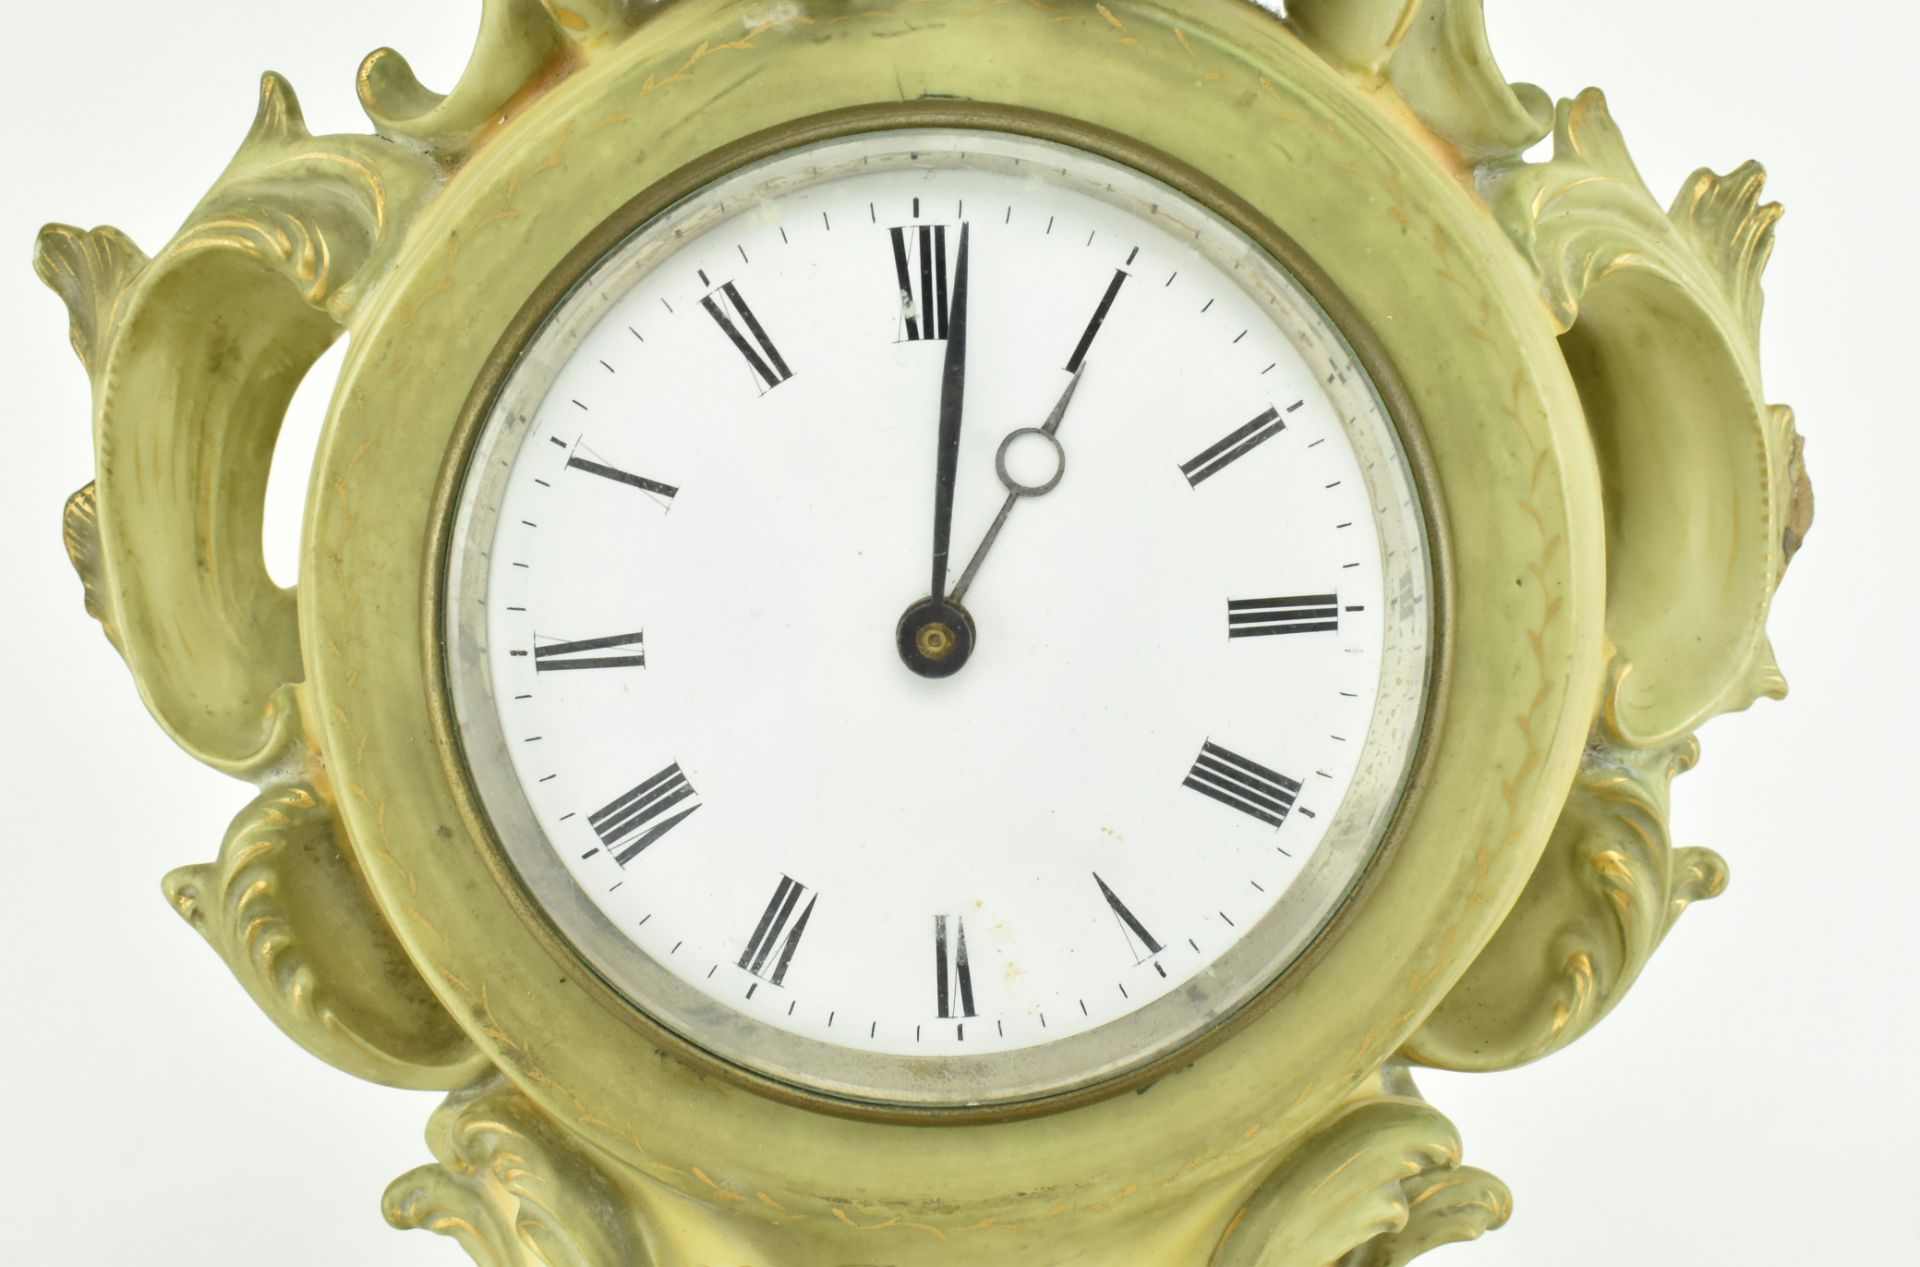 19TH CENTURY CONTINENTAL BISQUE PORCELAIN MANTLE CLOCK - Image 4 of 10